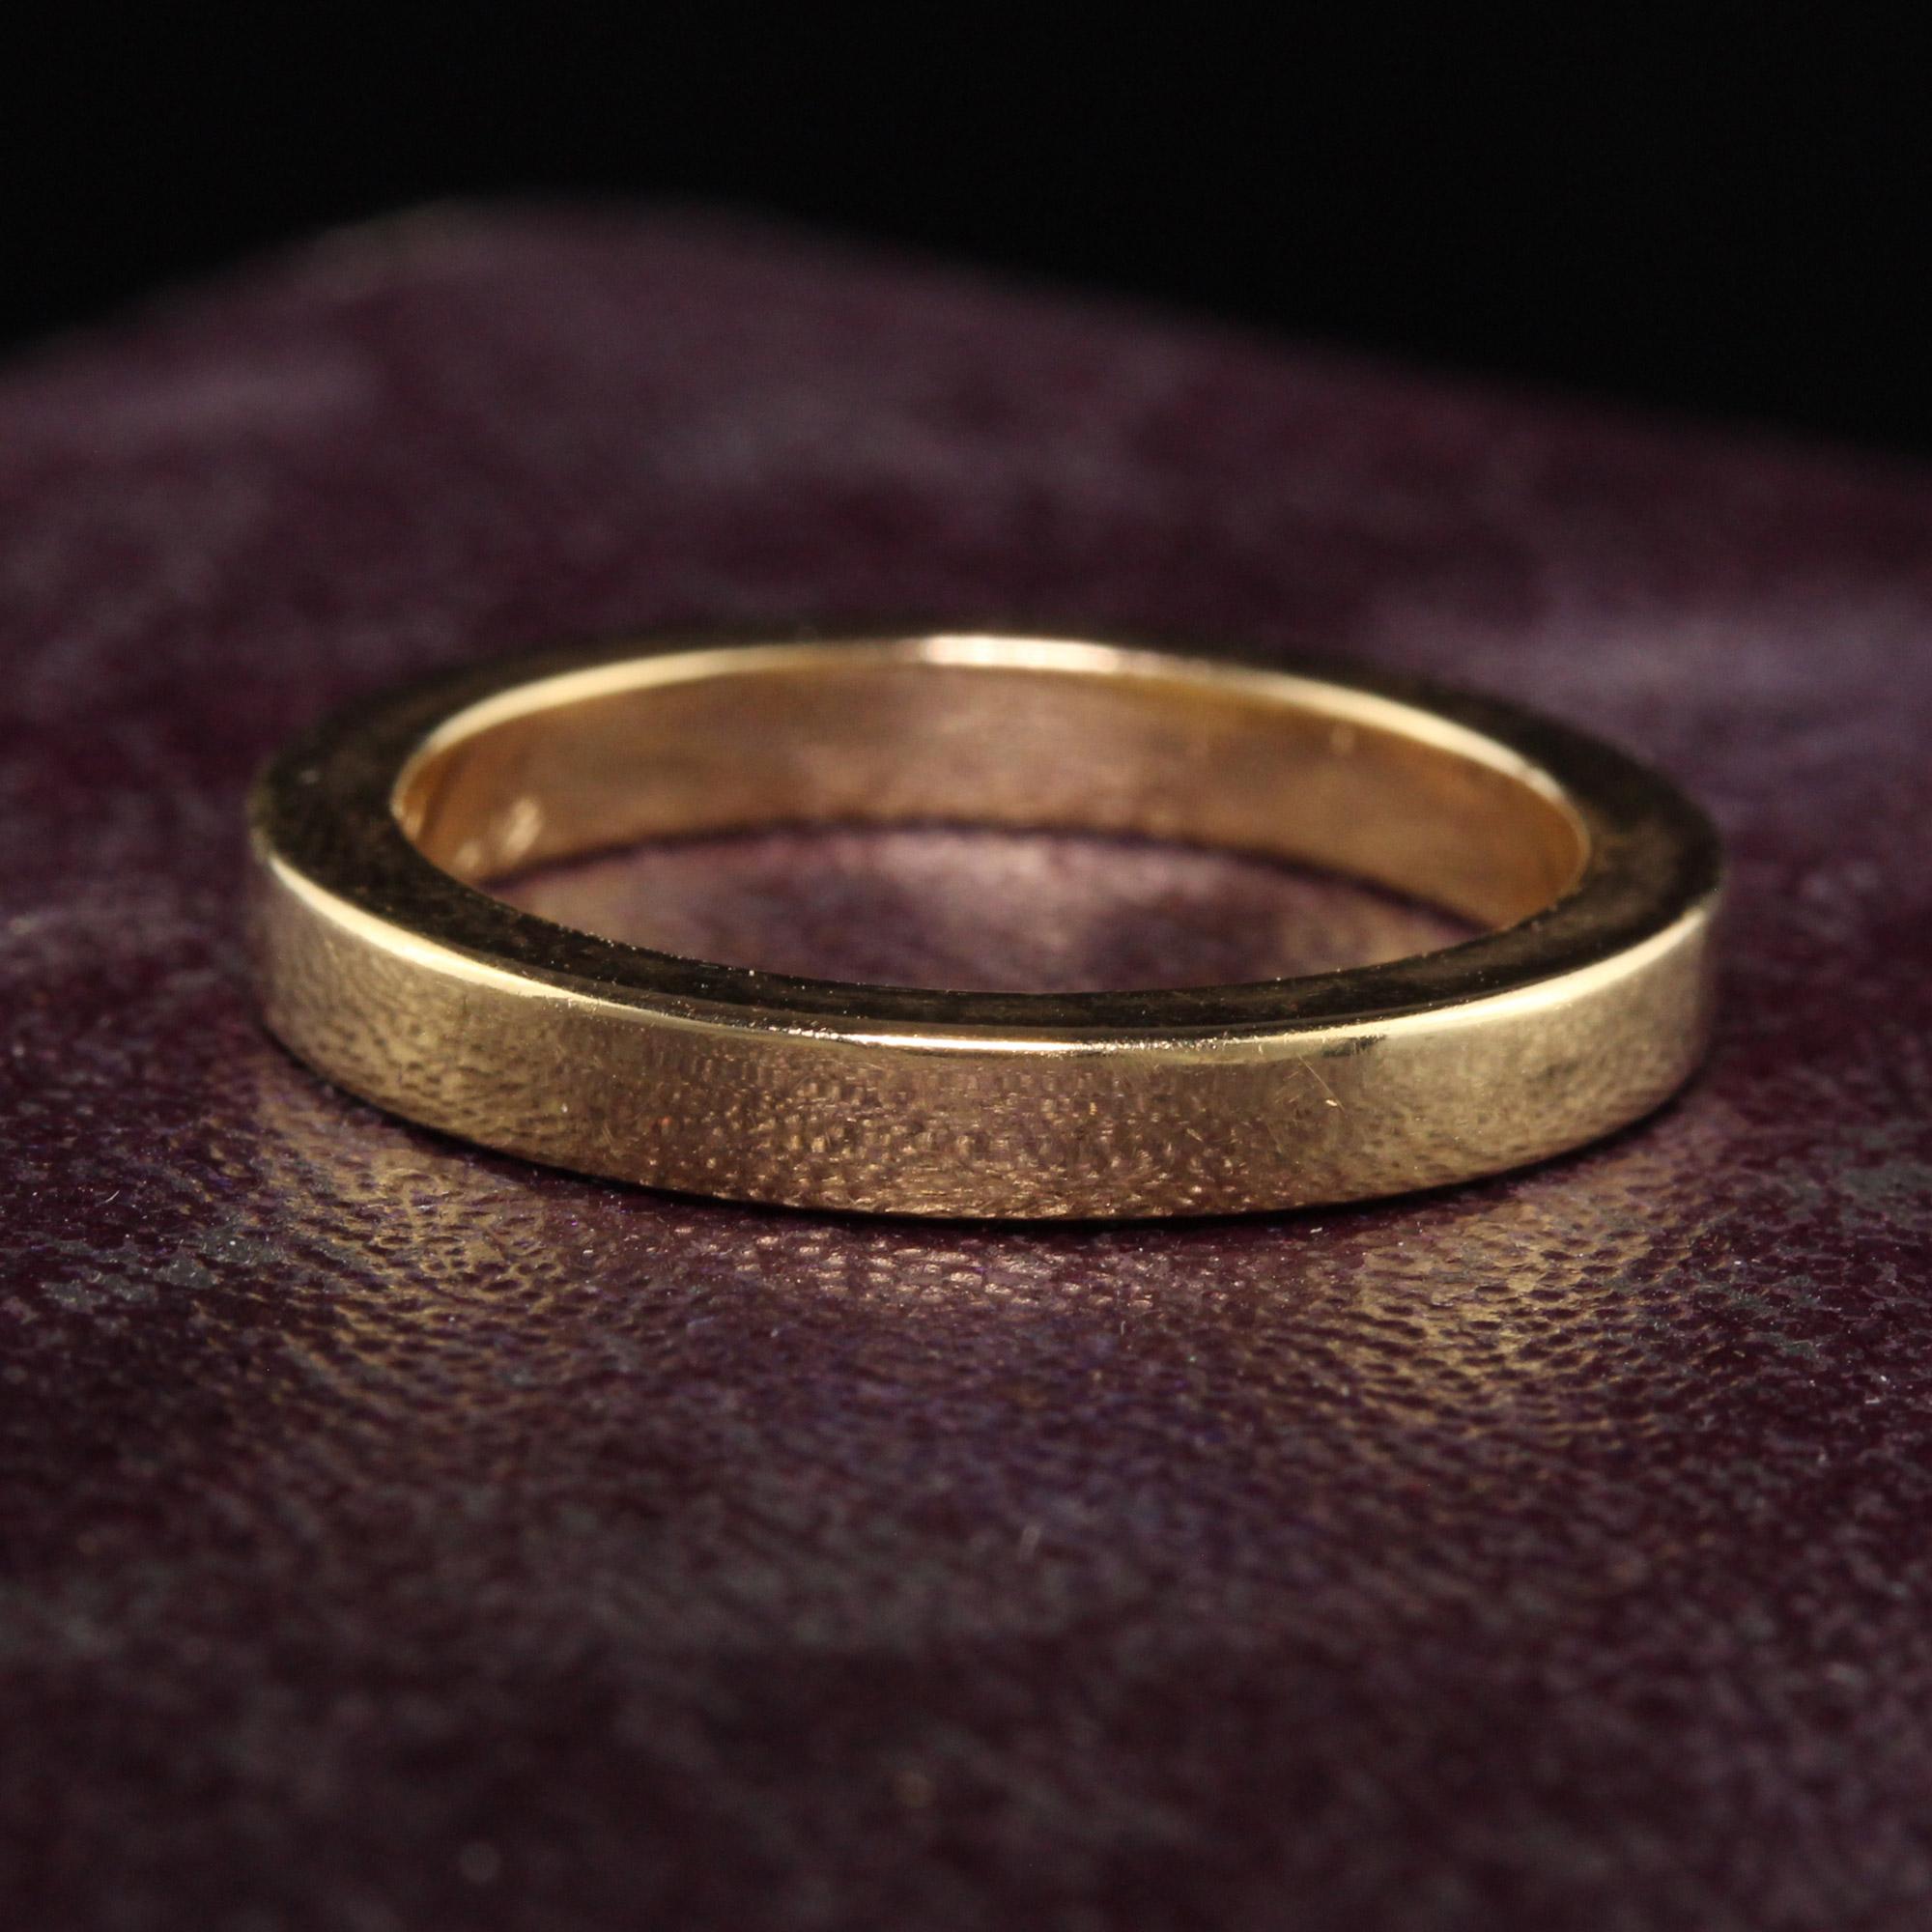 Beautiful Vintage Estate 18K Yellow Gold Classic Wedding Band. This classic wedding band is crafted in solid 18K yellow gold and is in good condition.

Item #R1159

Metal: 18K Yellow Gold

Weight: 4.1 Grams

Size: 4 3/4

Measurements: Top of the